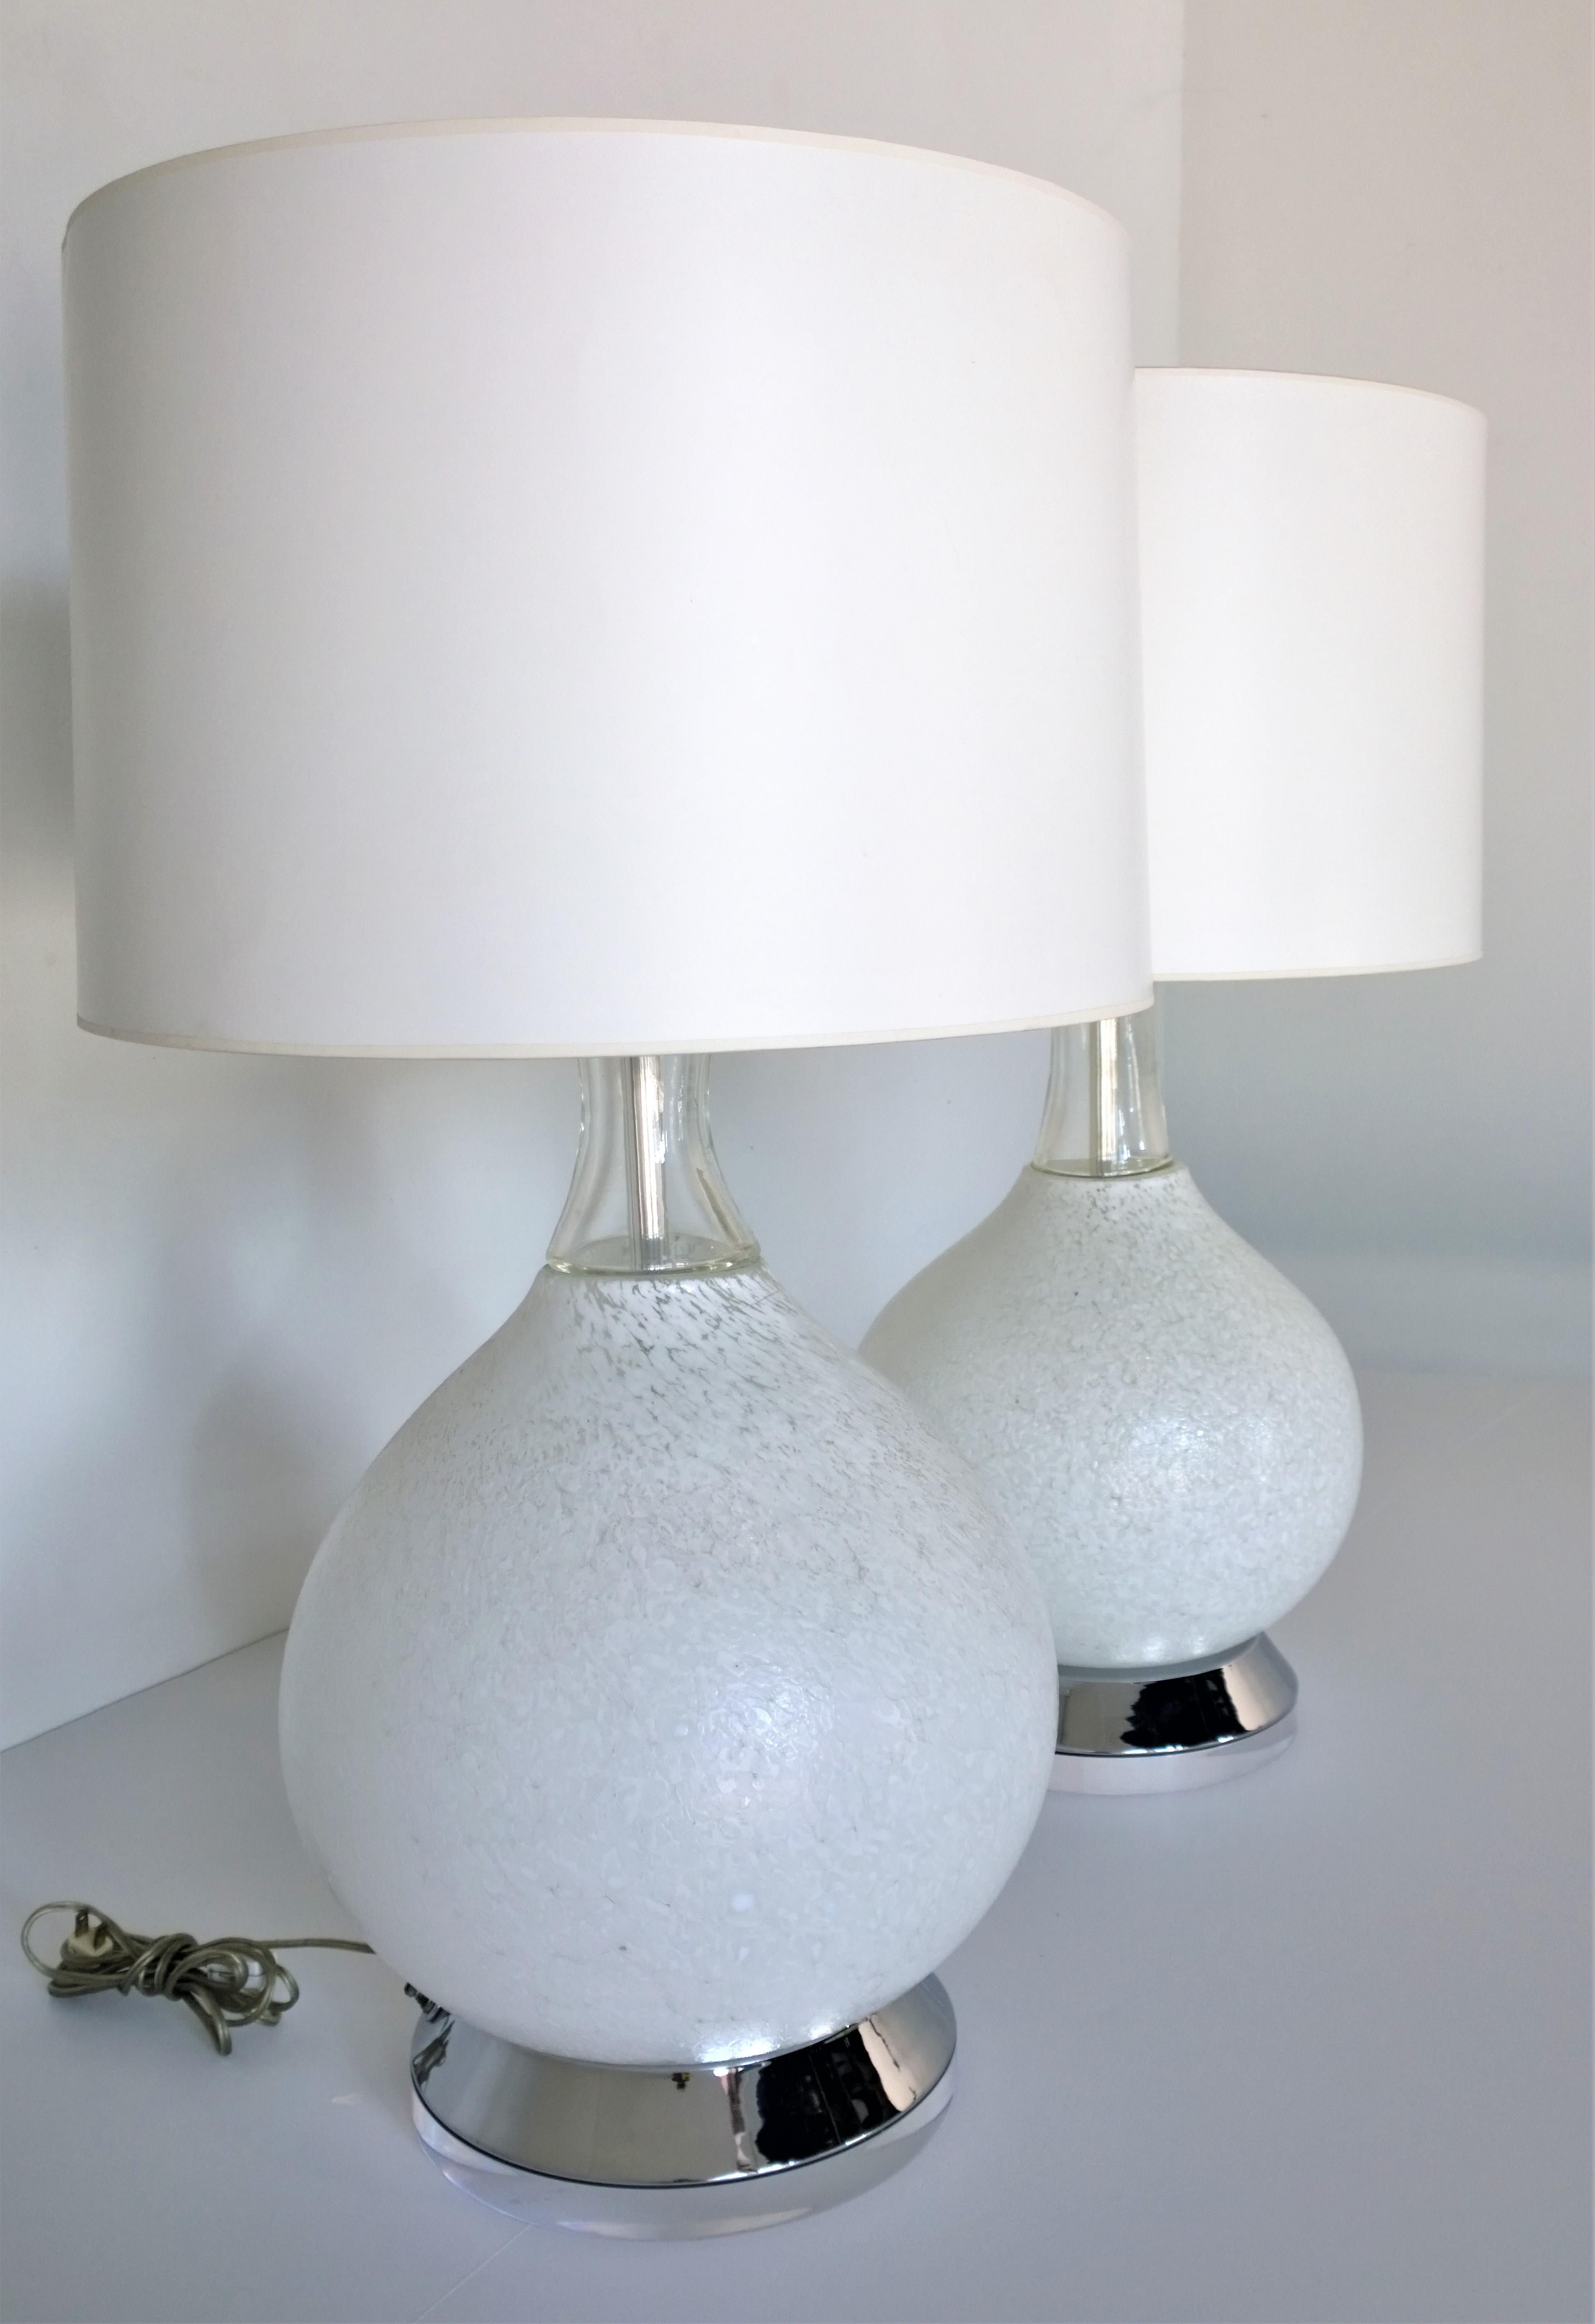 Italian Vistosi White Textured Murano Glass with Chrome & Lucite Base Table Lamps, Pair For Sale